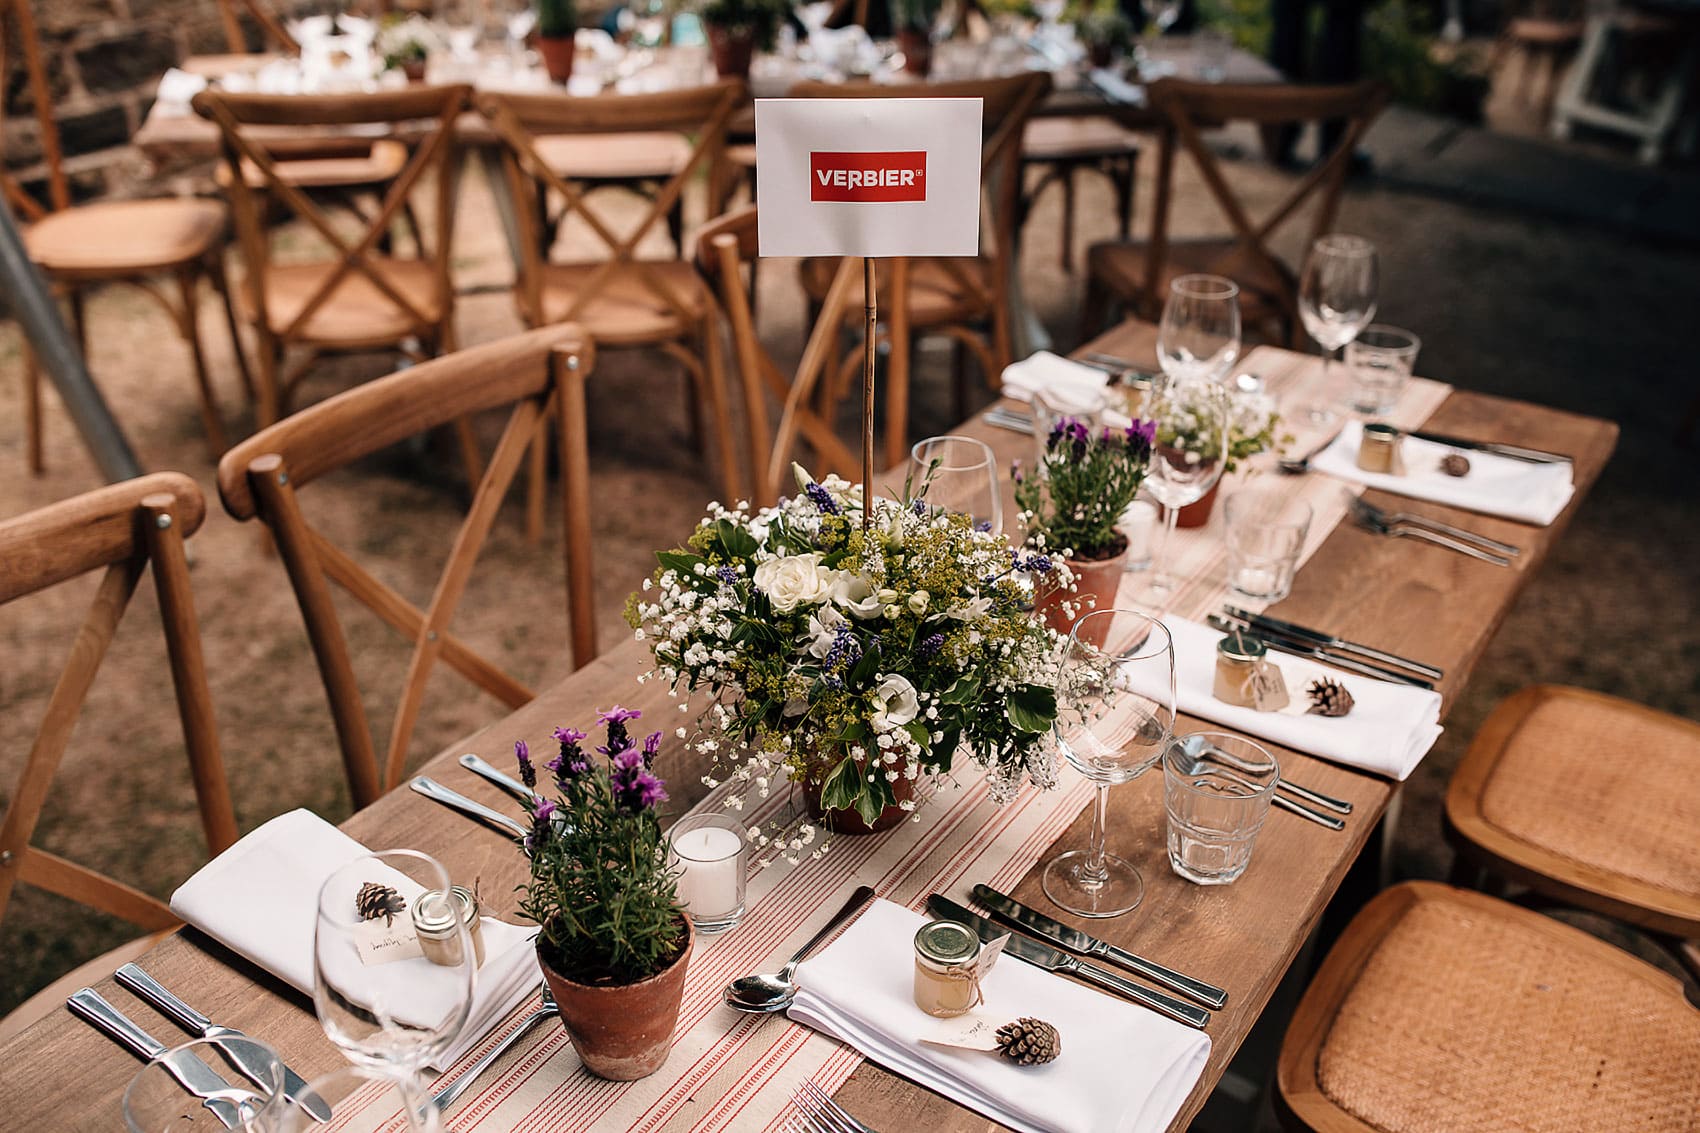 marquee wedding decor rustic wooden tables